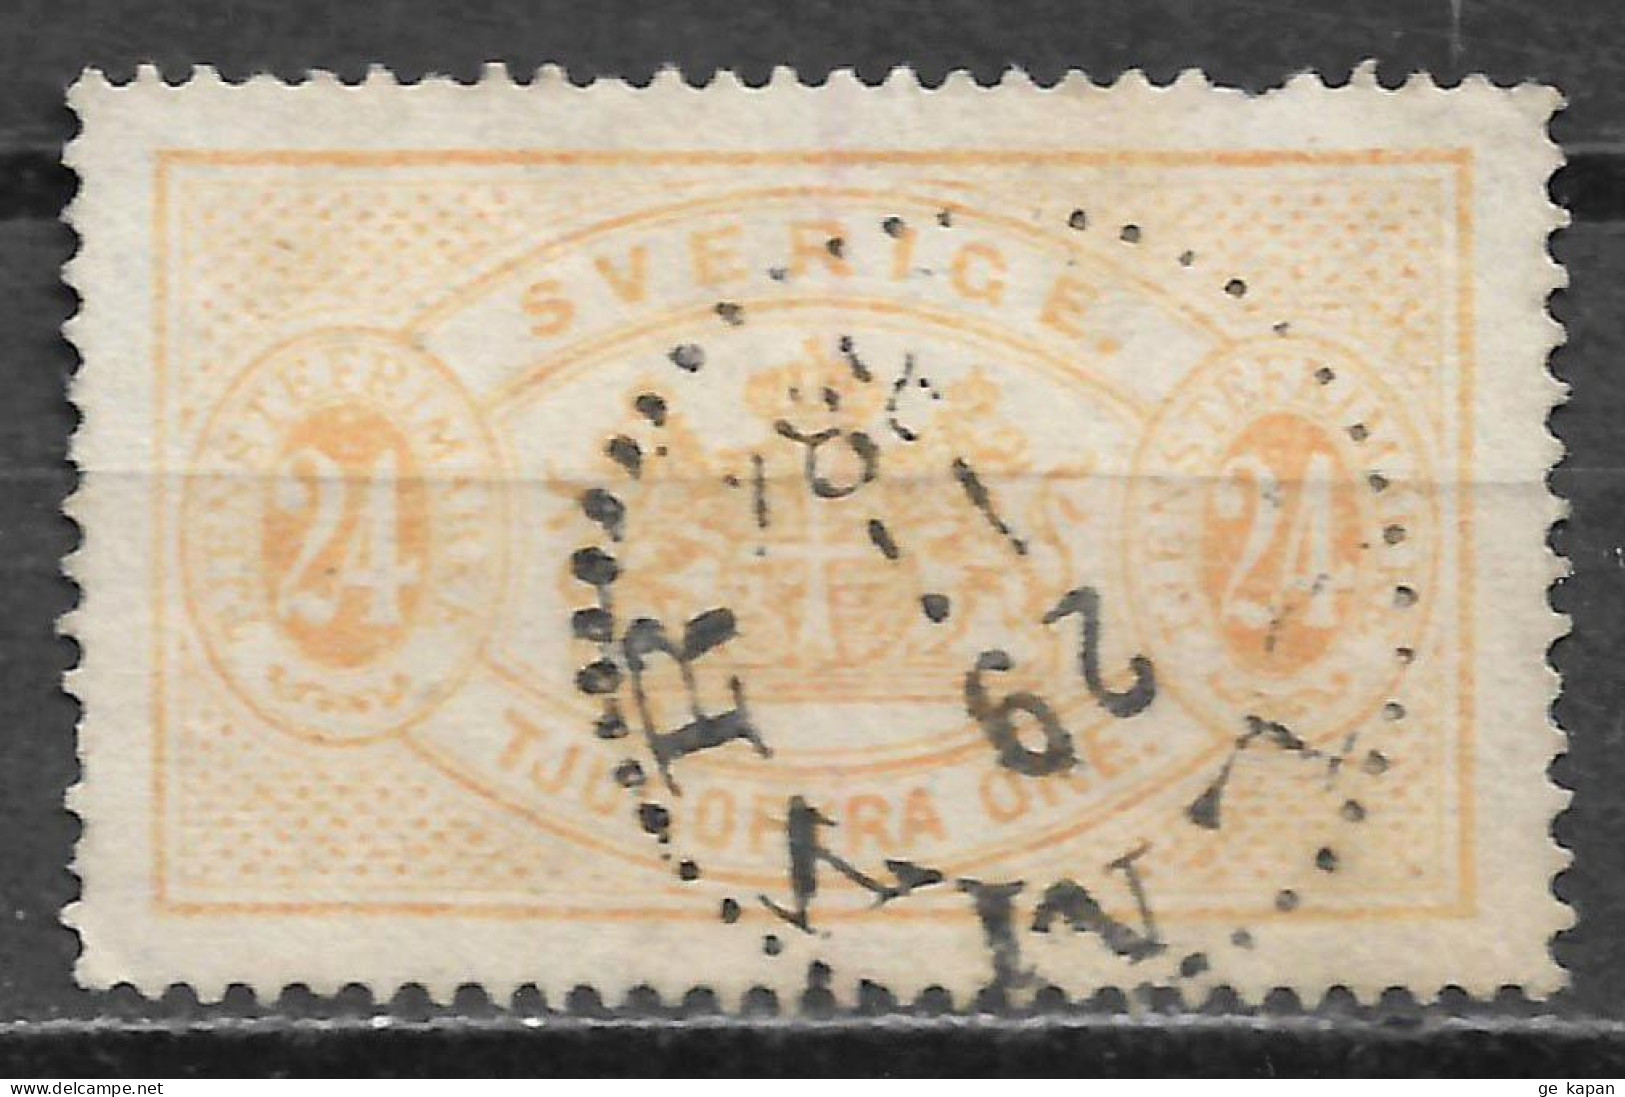 1881 SWEDEN Official USED STAMP Perf.13 (Scott # O21a) CV $22.50 - Officials